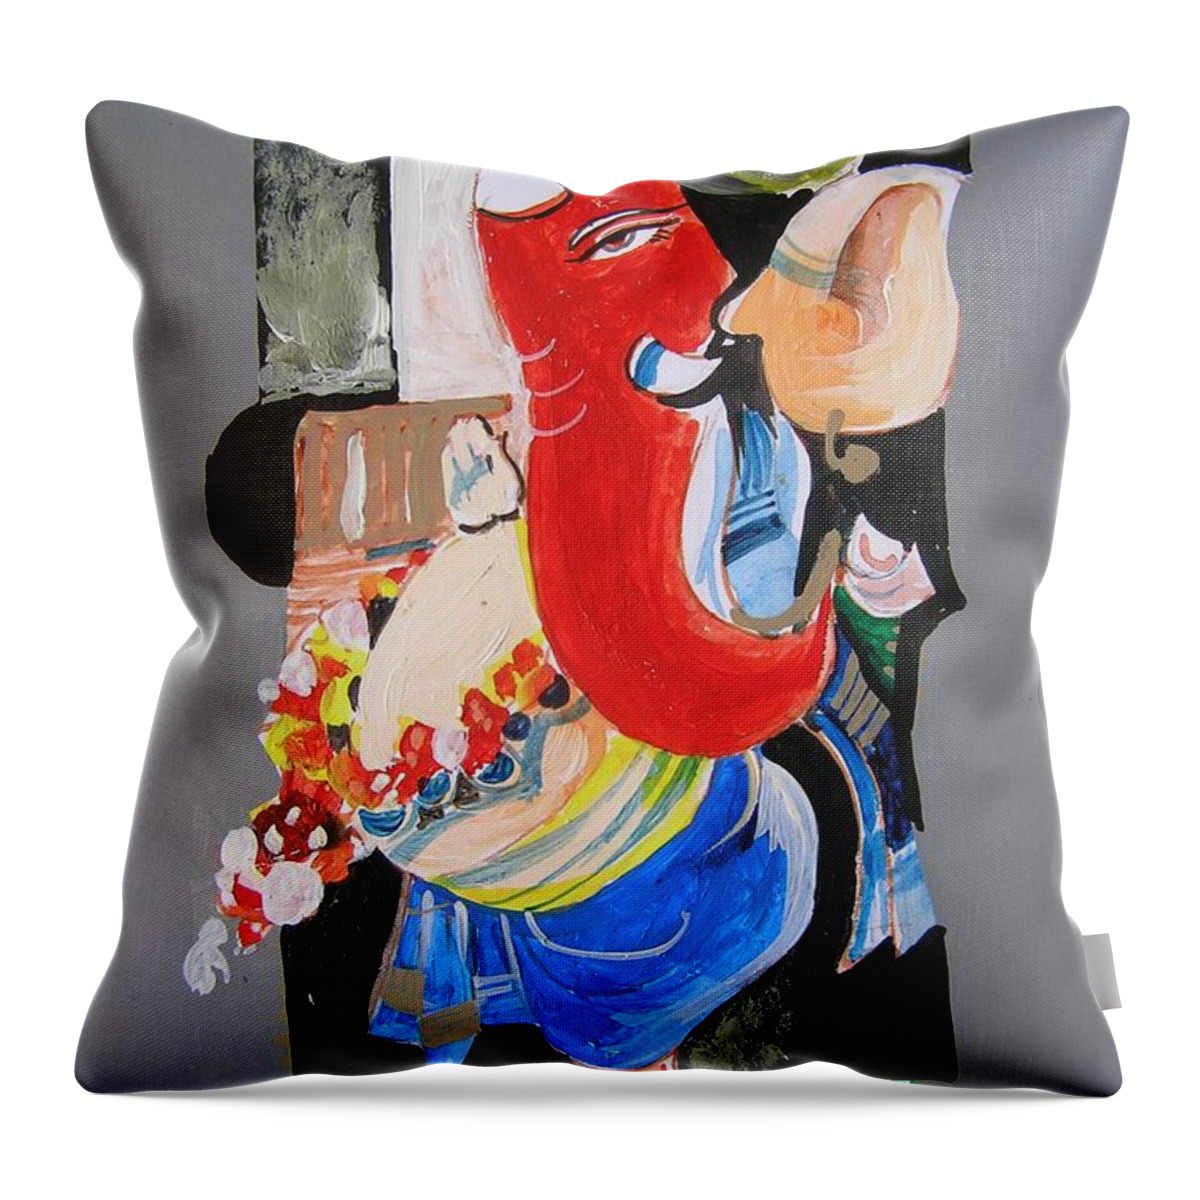 Ganesha Throw Pillow featuring the painting Elegant Grey by Chintaman Rudra